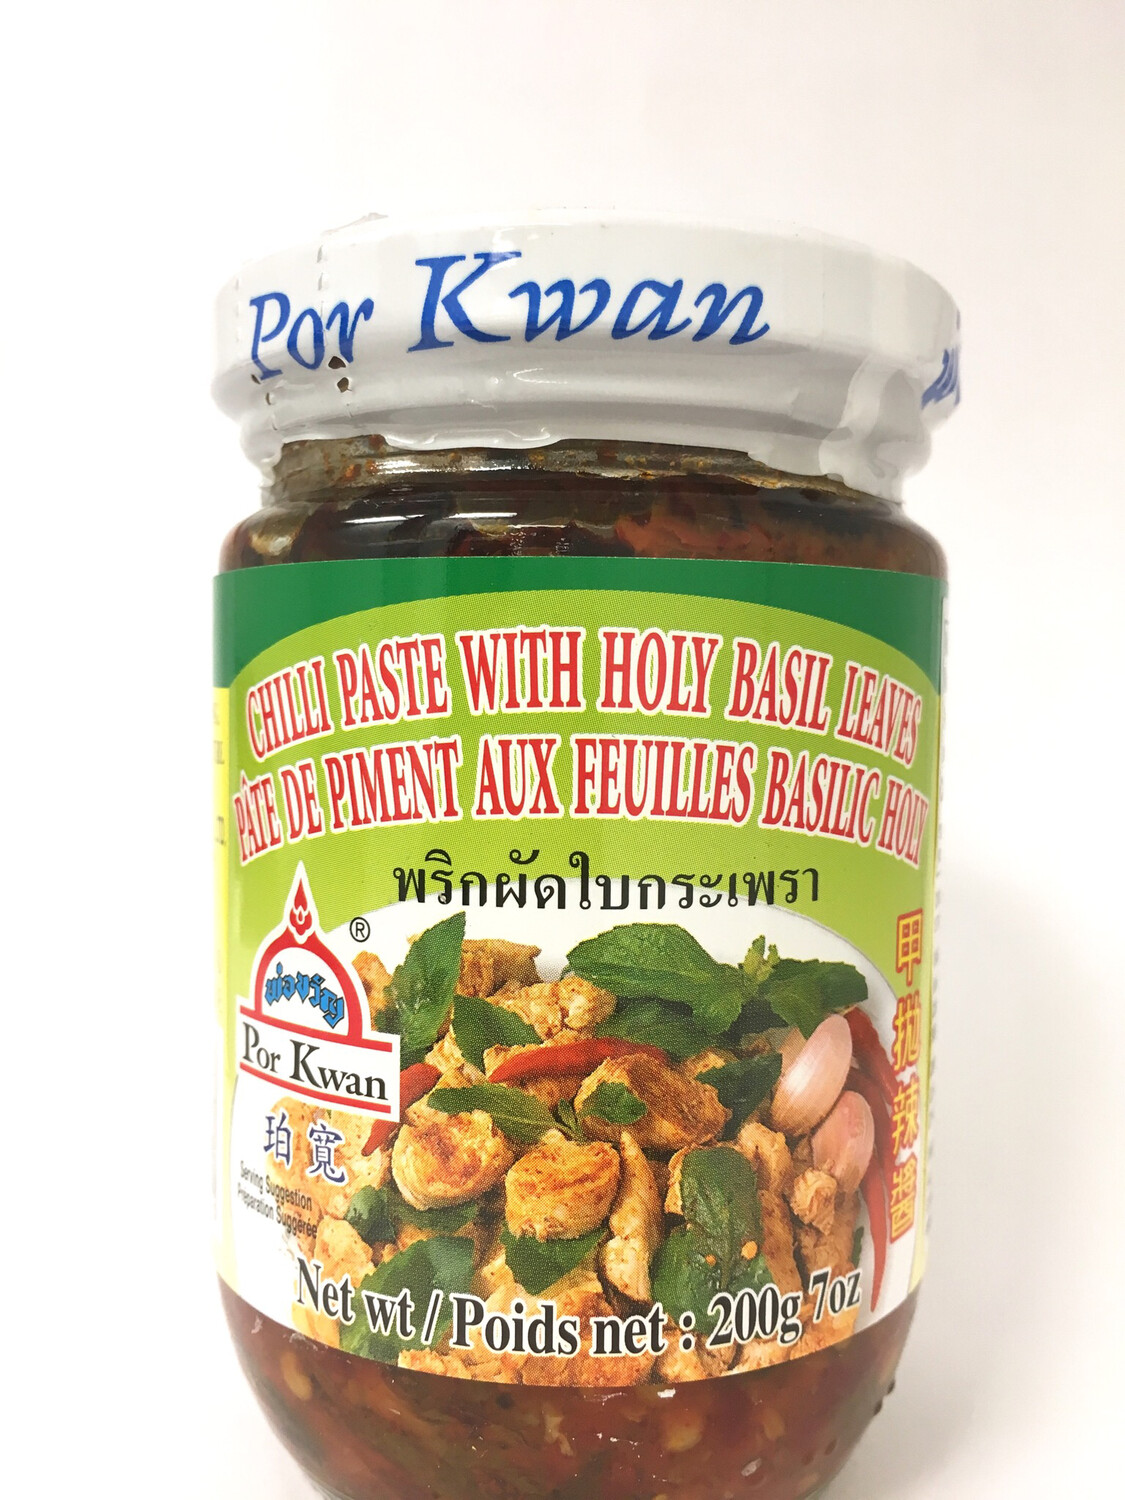 PORKWAN CHILI PASTE WITH HOLY BASIL LEAVES 24X225G